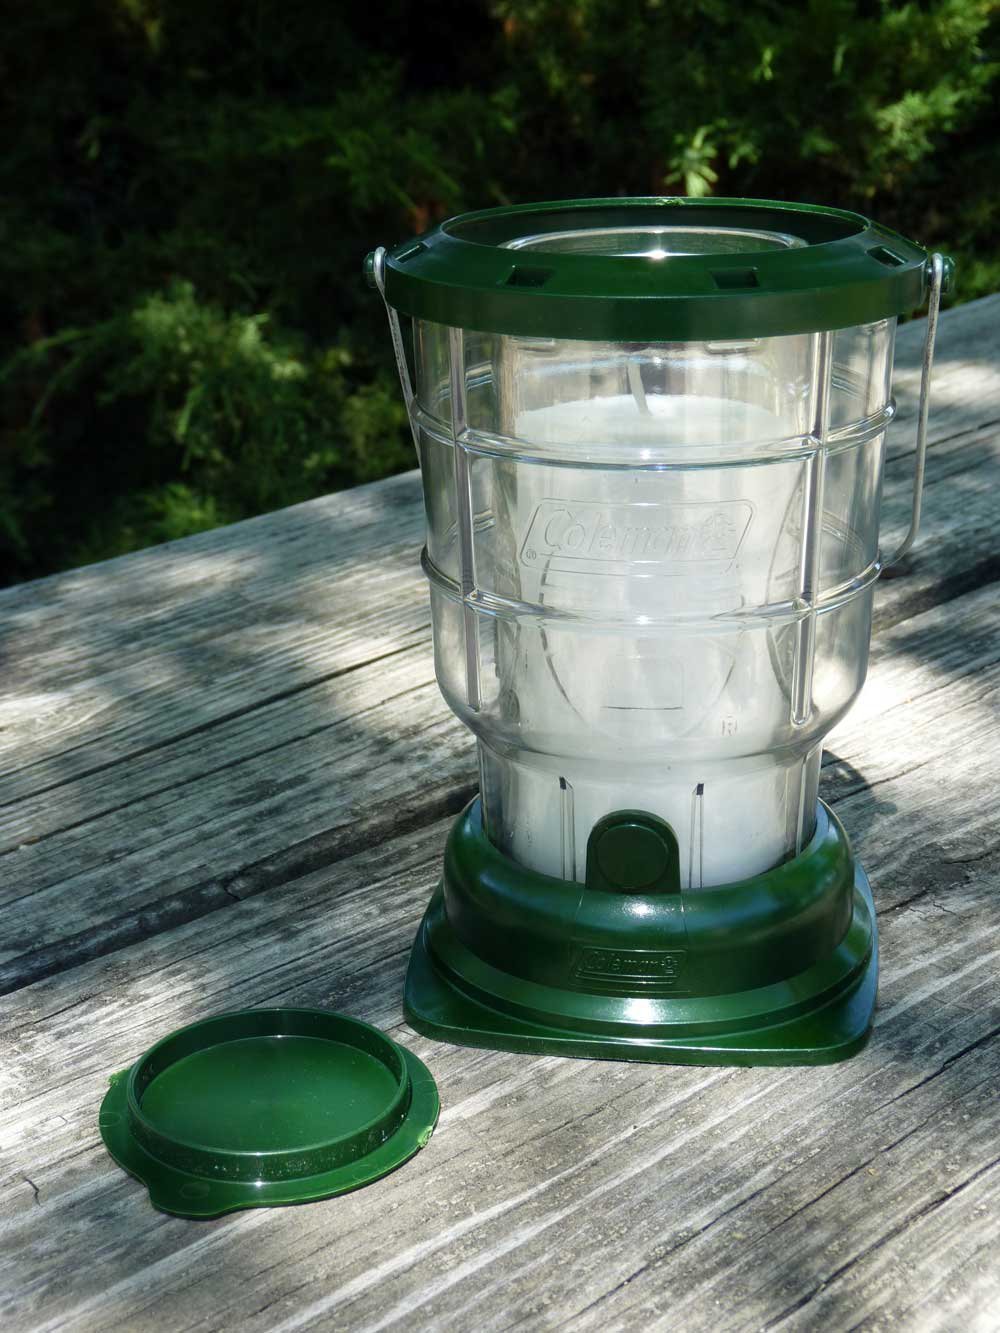 Coleman Citronella Candle Outdoor Lantern - 70+ Hours, 6.7 Ounce, Green - image 2 of 7